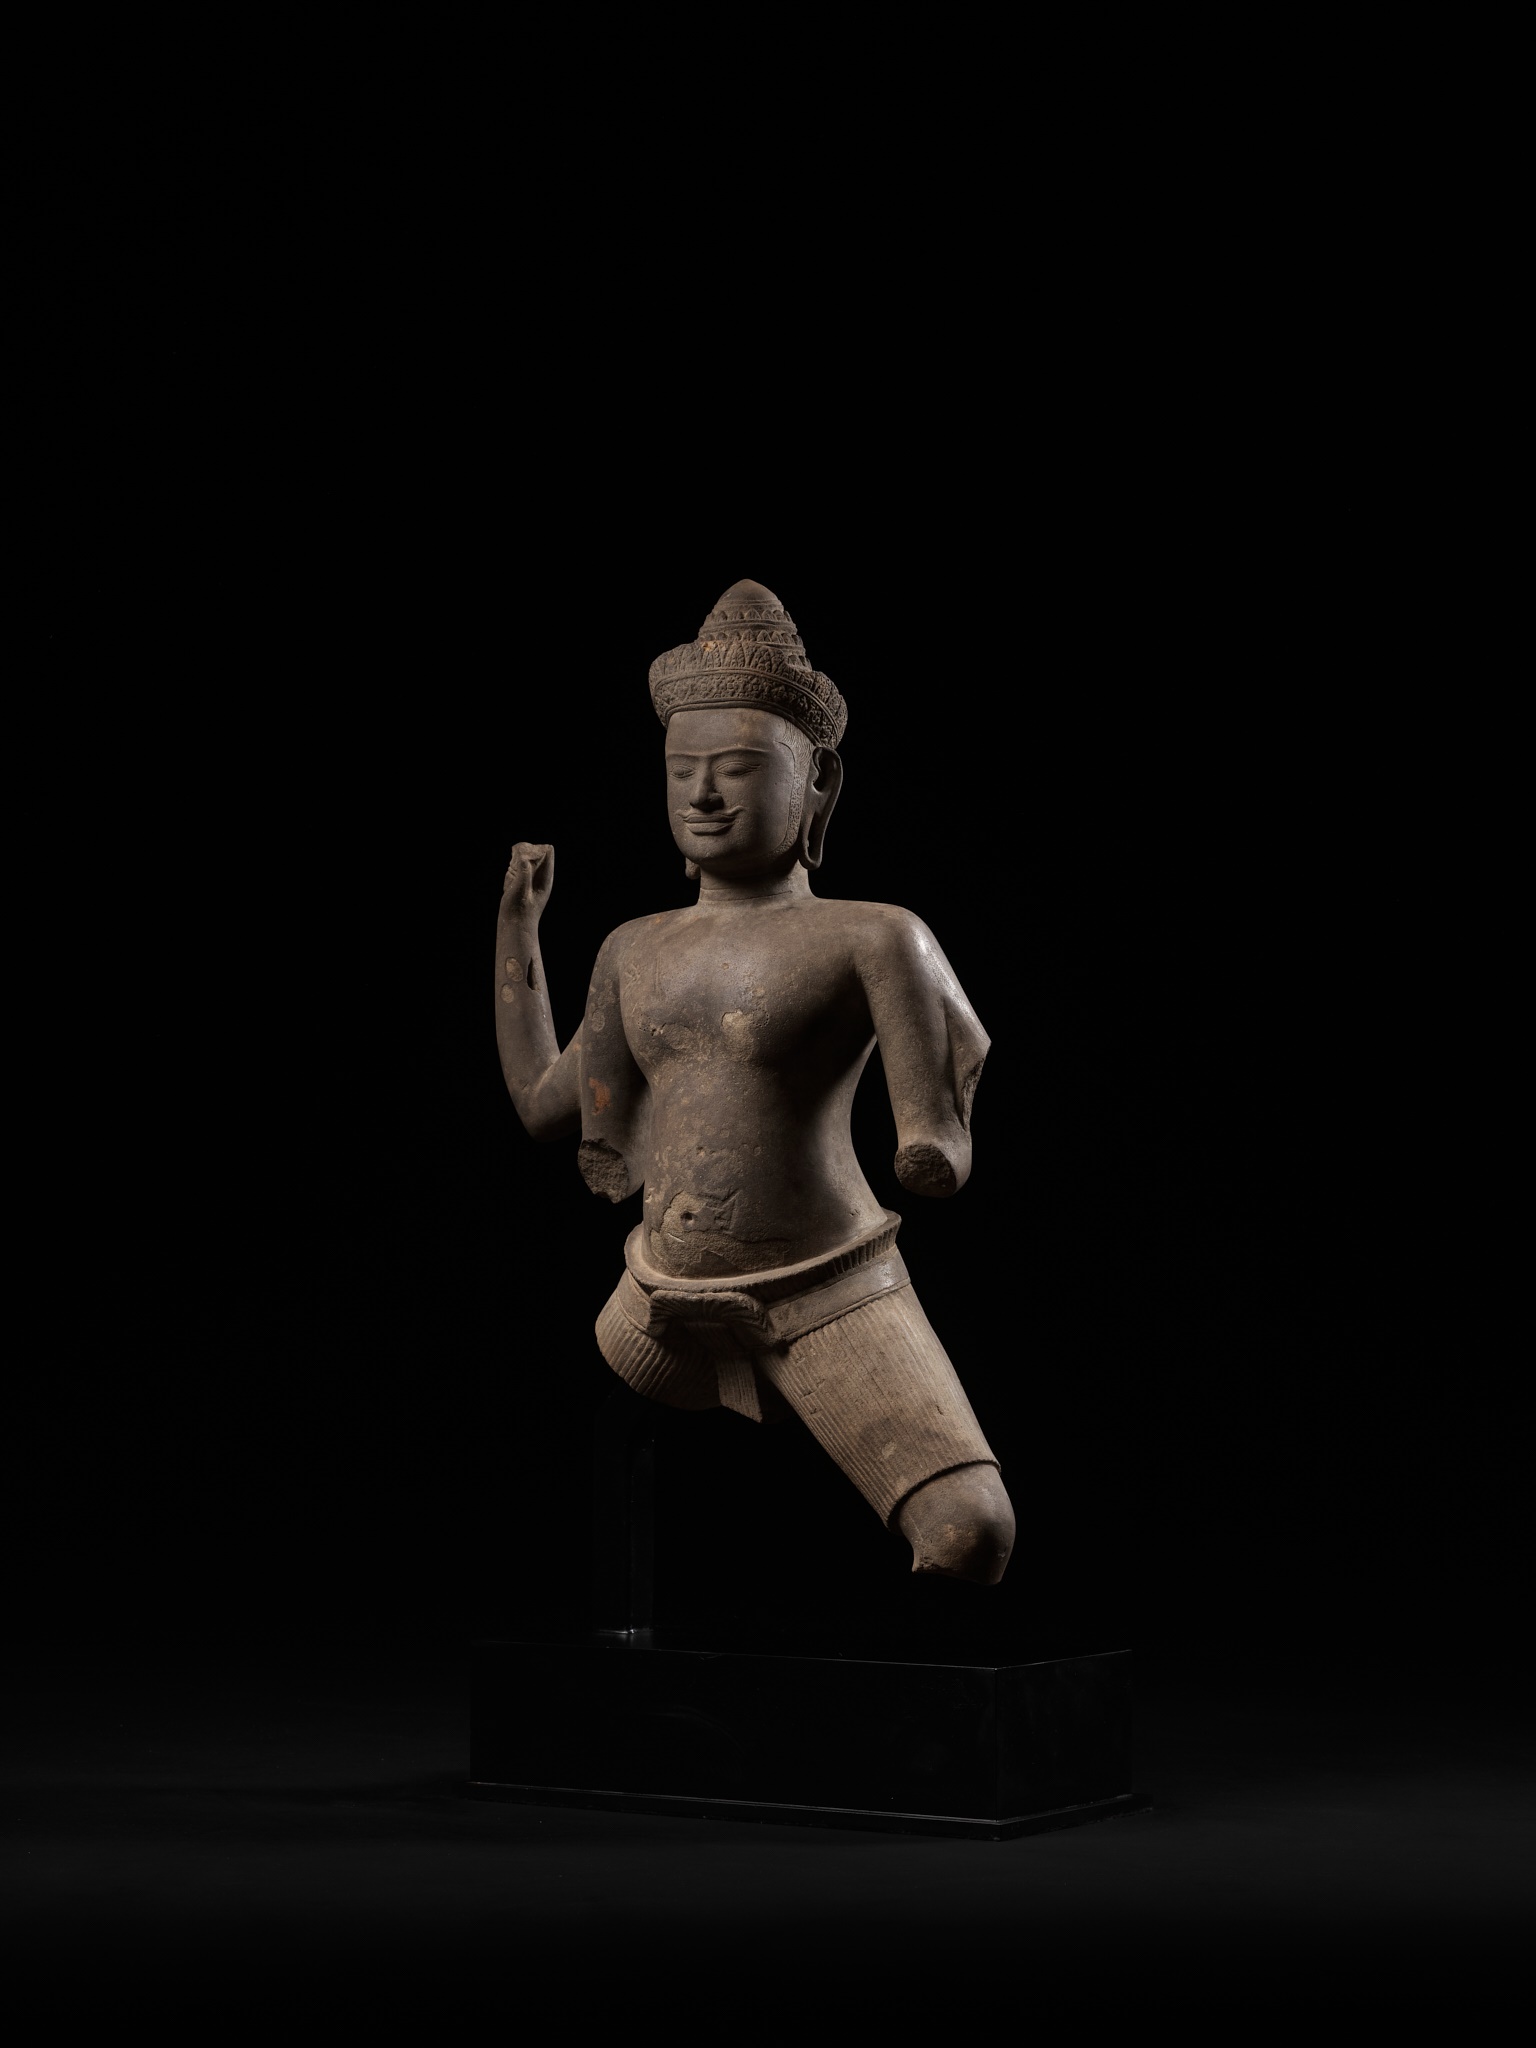 A KHMER SANDSTONE FIGURE OF A MALE DEITY, ANGKOR PERIOD - Image 5 of 13